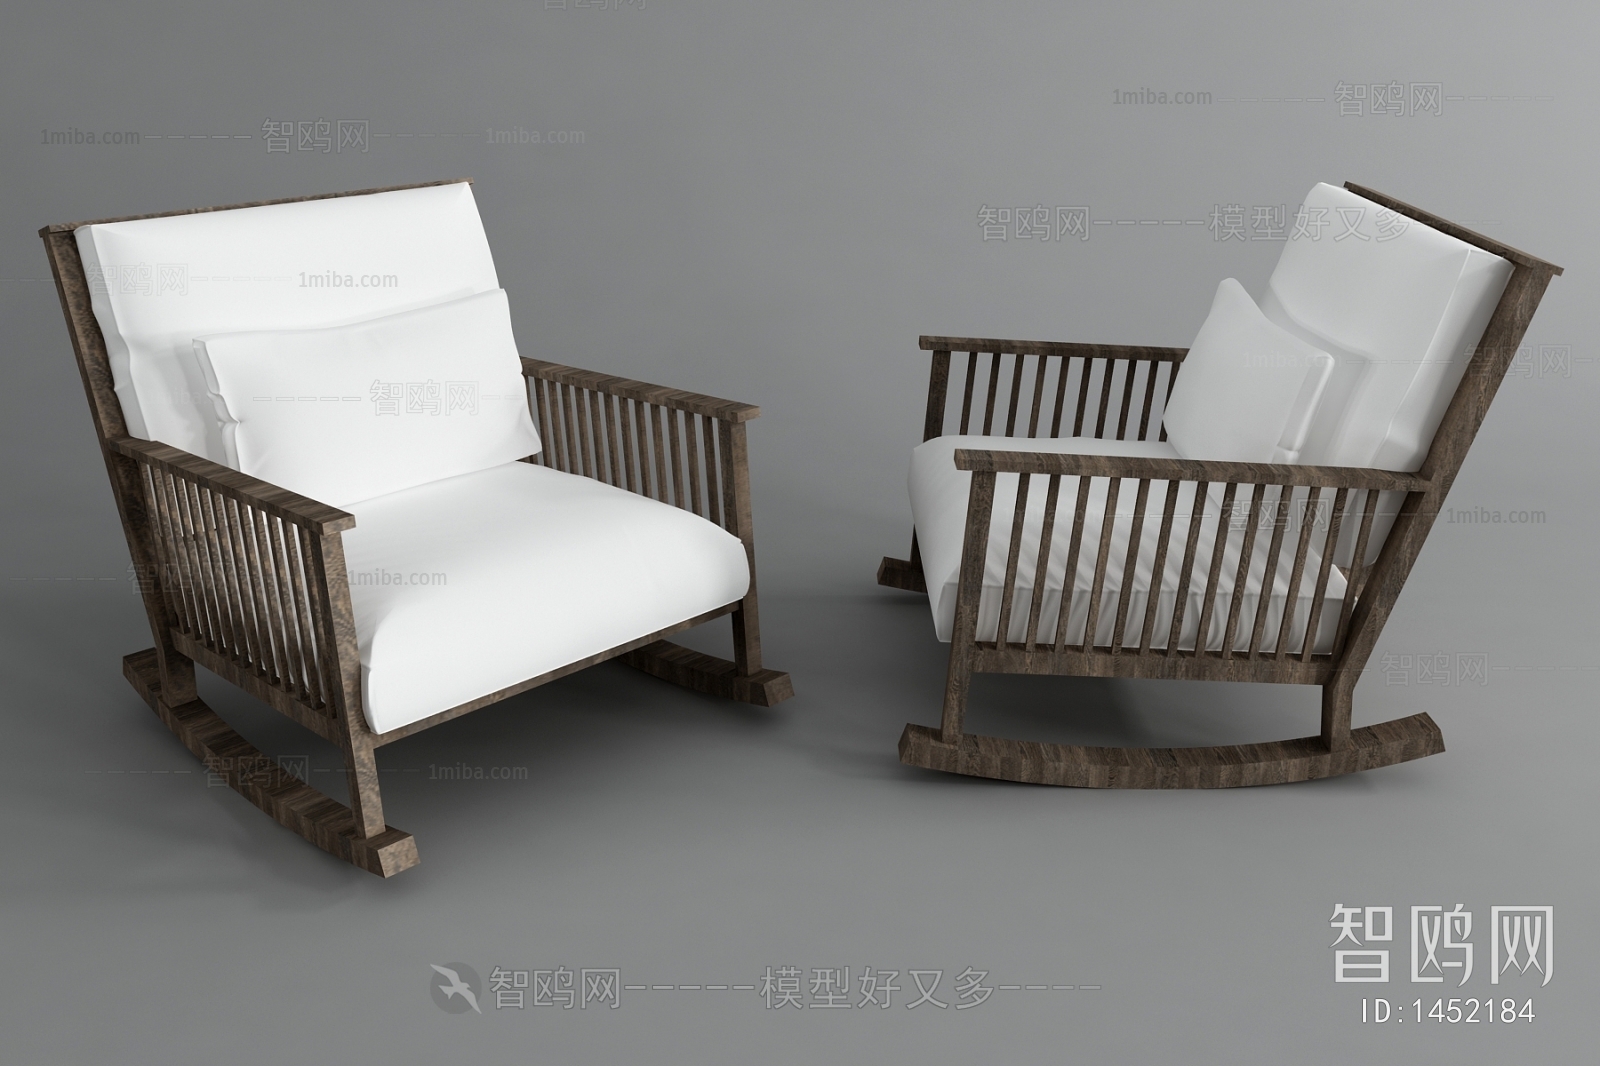 New Chinese Style Rocking Chair